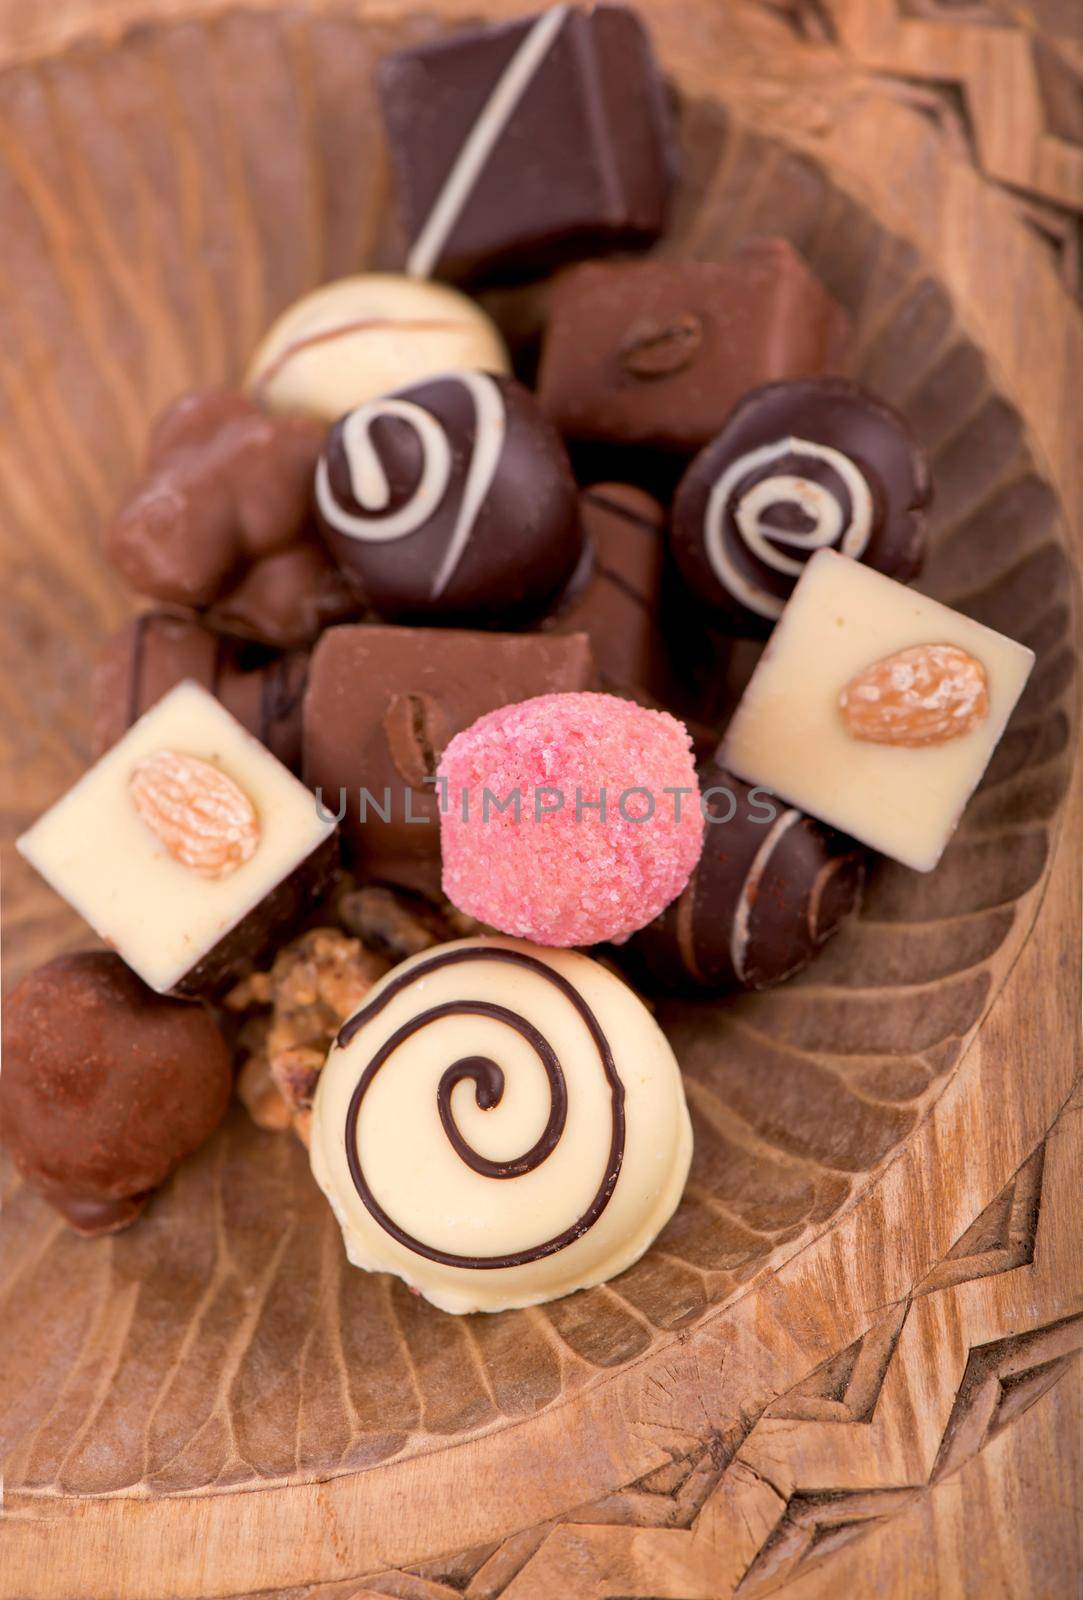 Broken bars of milk chocolate with nuts and sublimated berries and chocolate candies. handmade candy on a wooden surface by aprilphoto